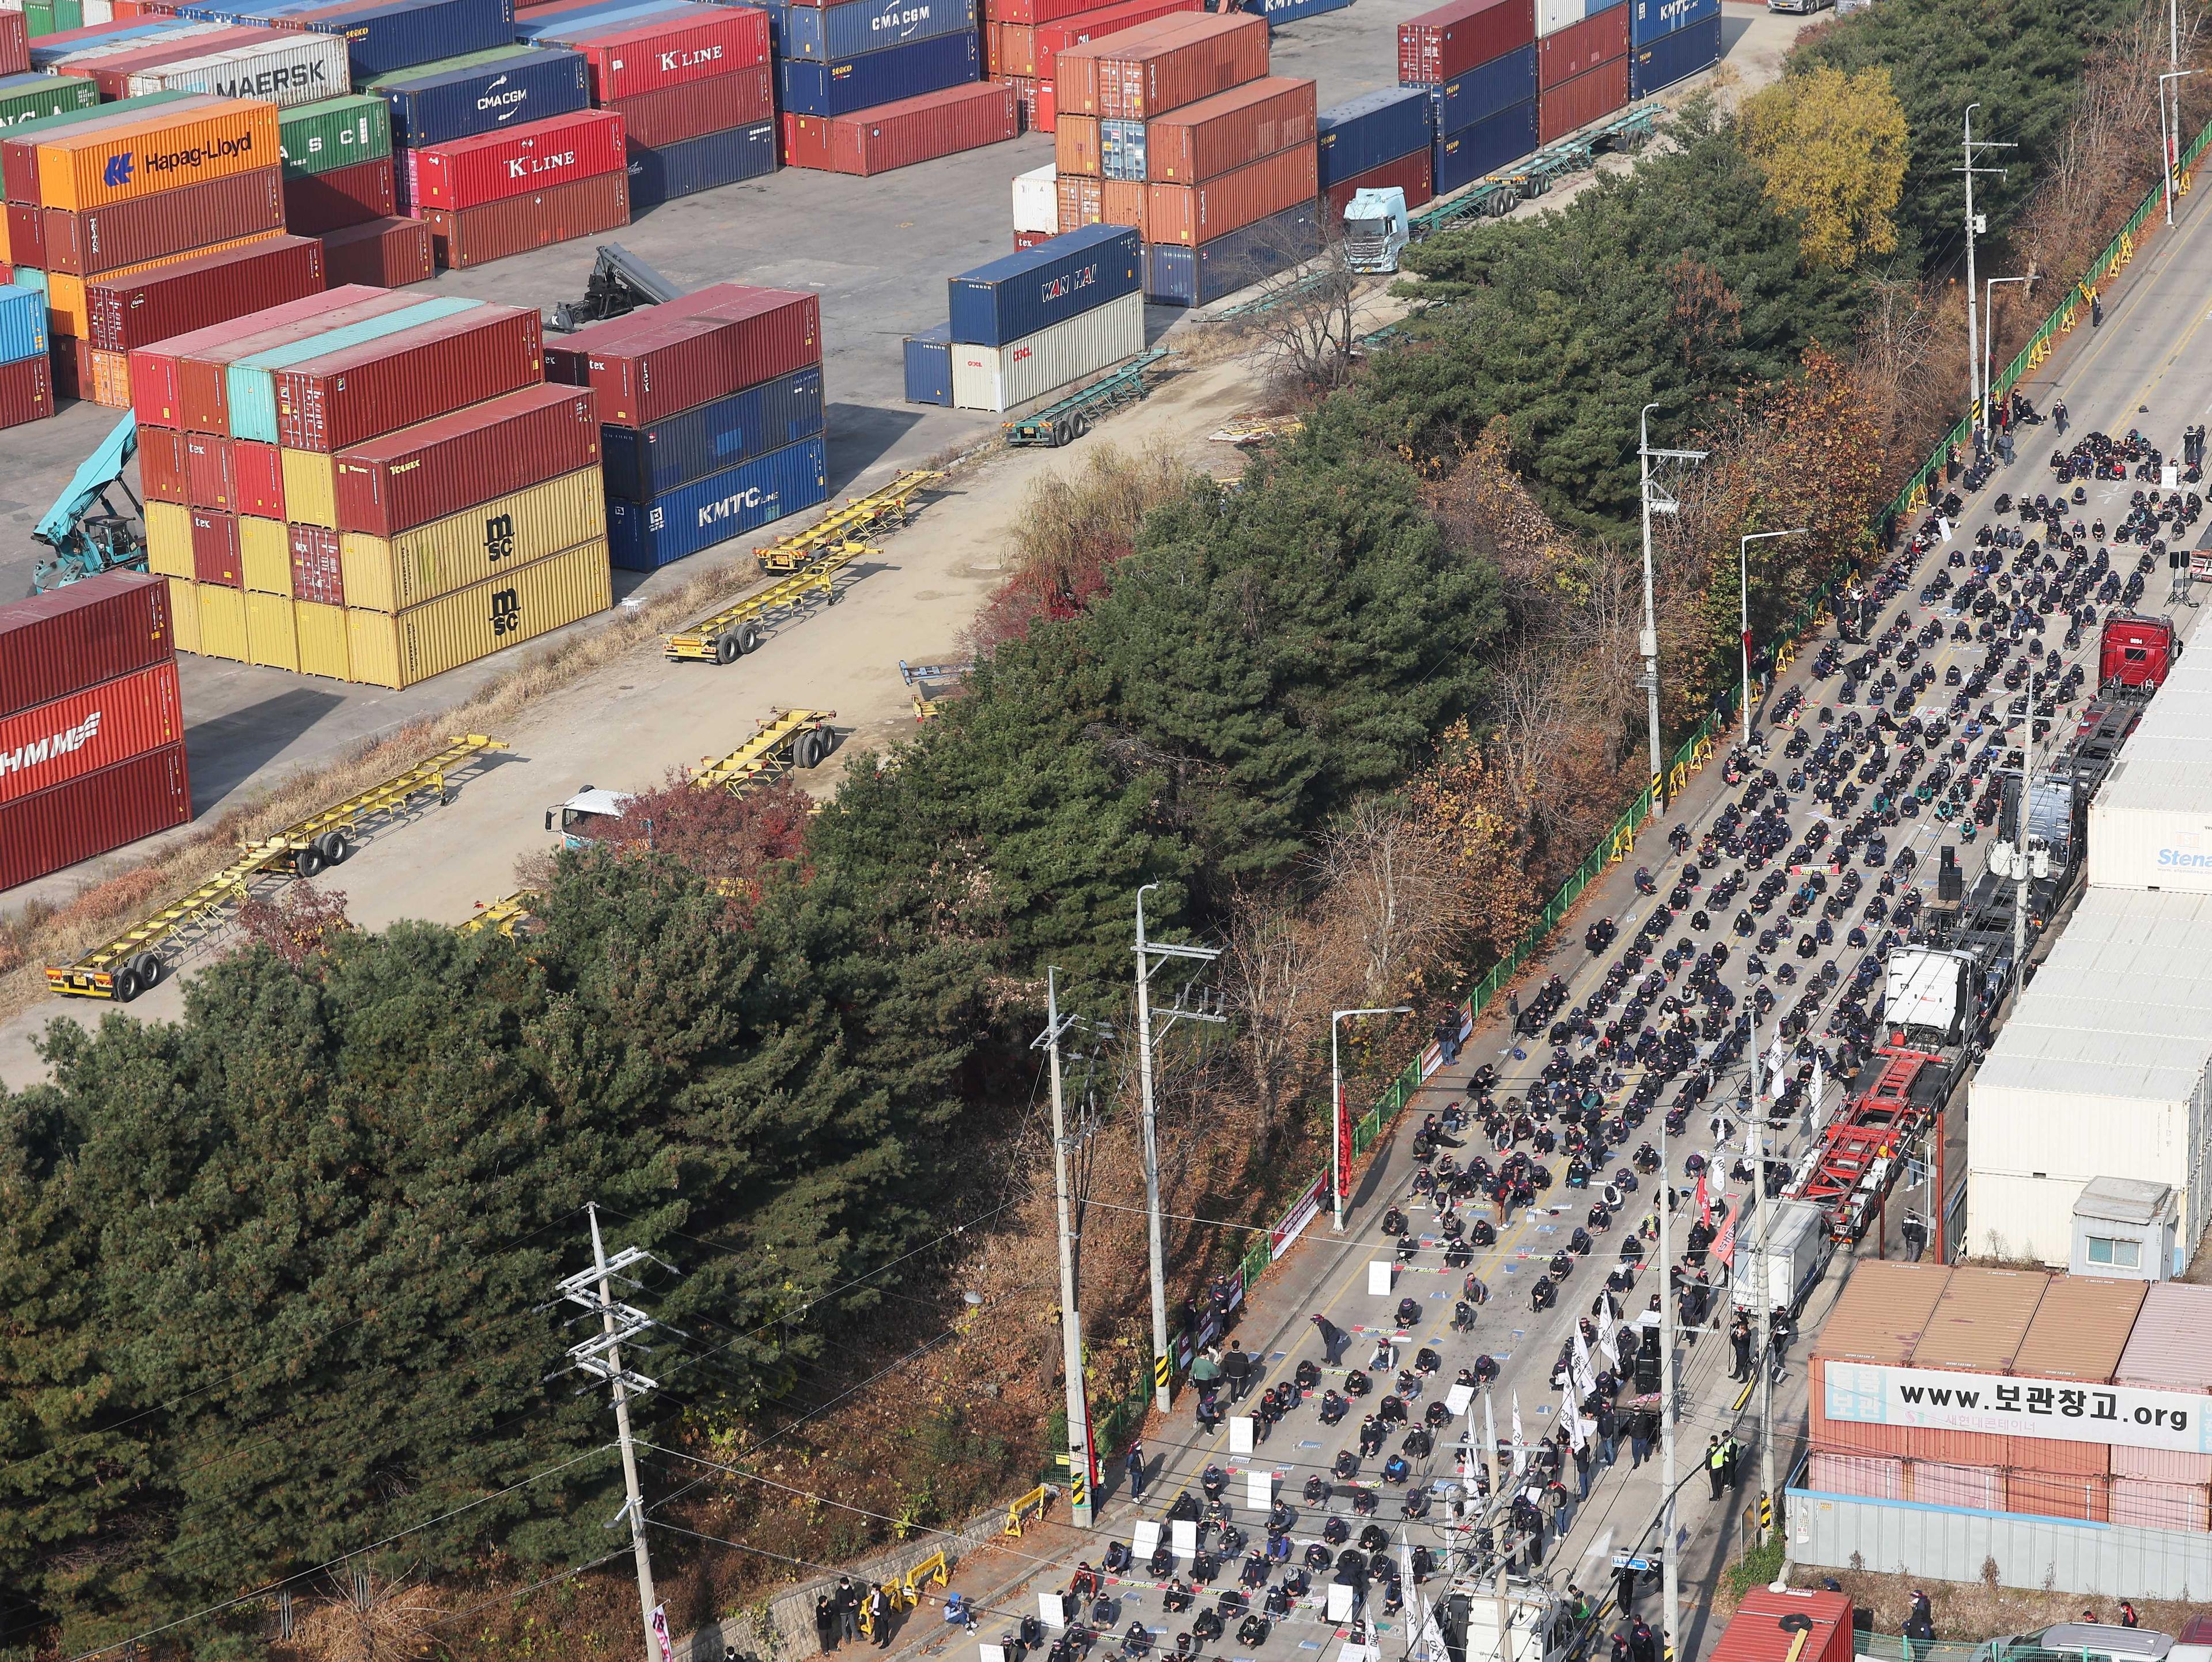 Unionised truckers shout slogans during their rally as they kick off their strike in front of transport hub in Uiwang, south of Seoul, South Korea Nov 24. Photo: Reuters